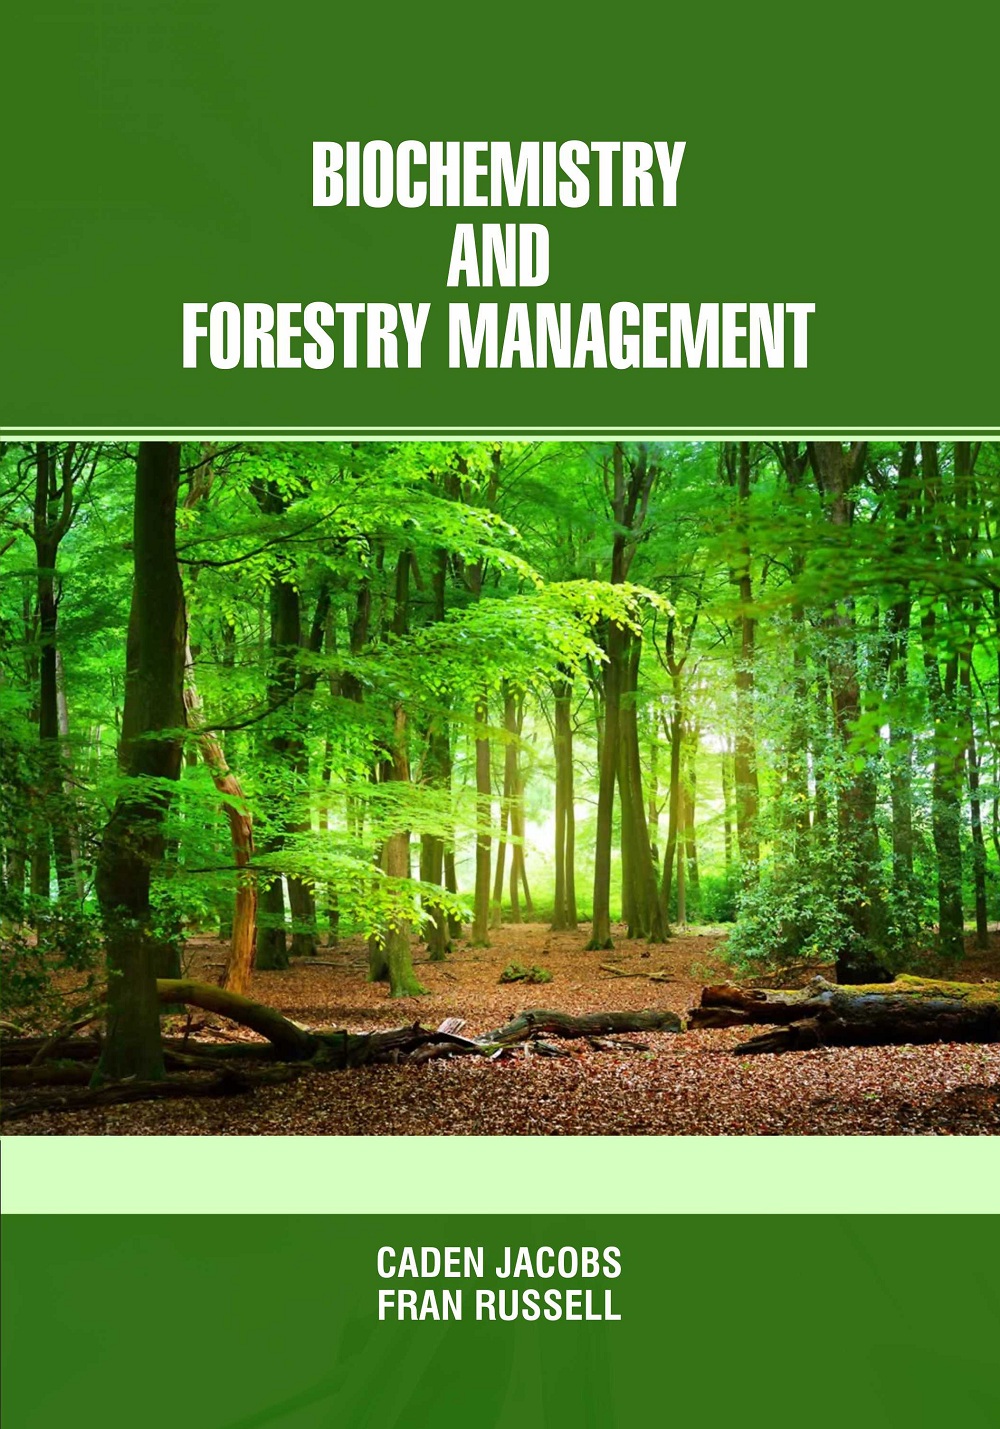 Biochemistry and Forestry Management